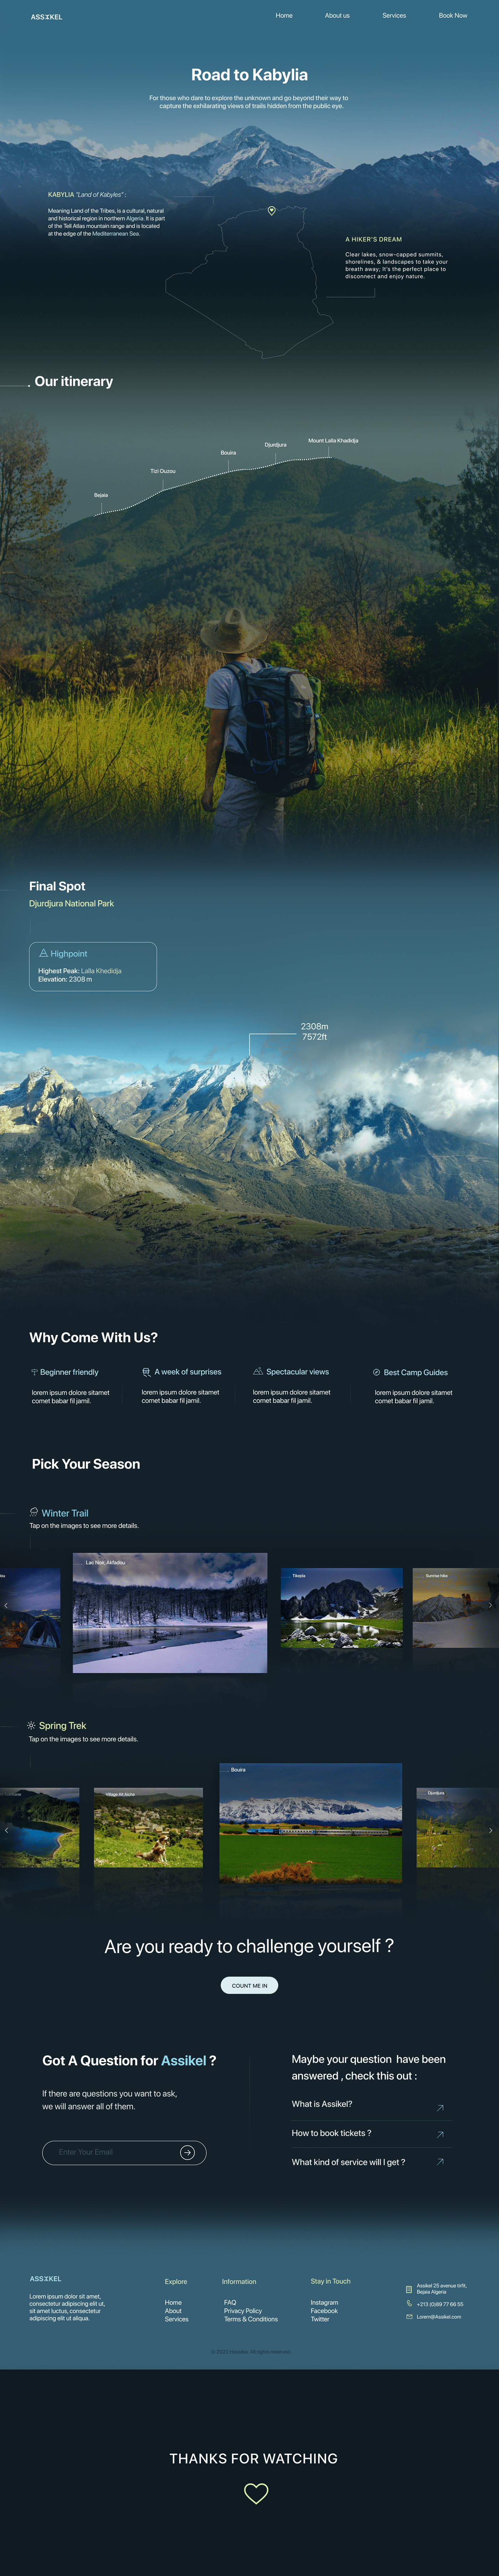 website of a hiking group that organizes trips to kabylia in algeria, known for its mountains 
